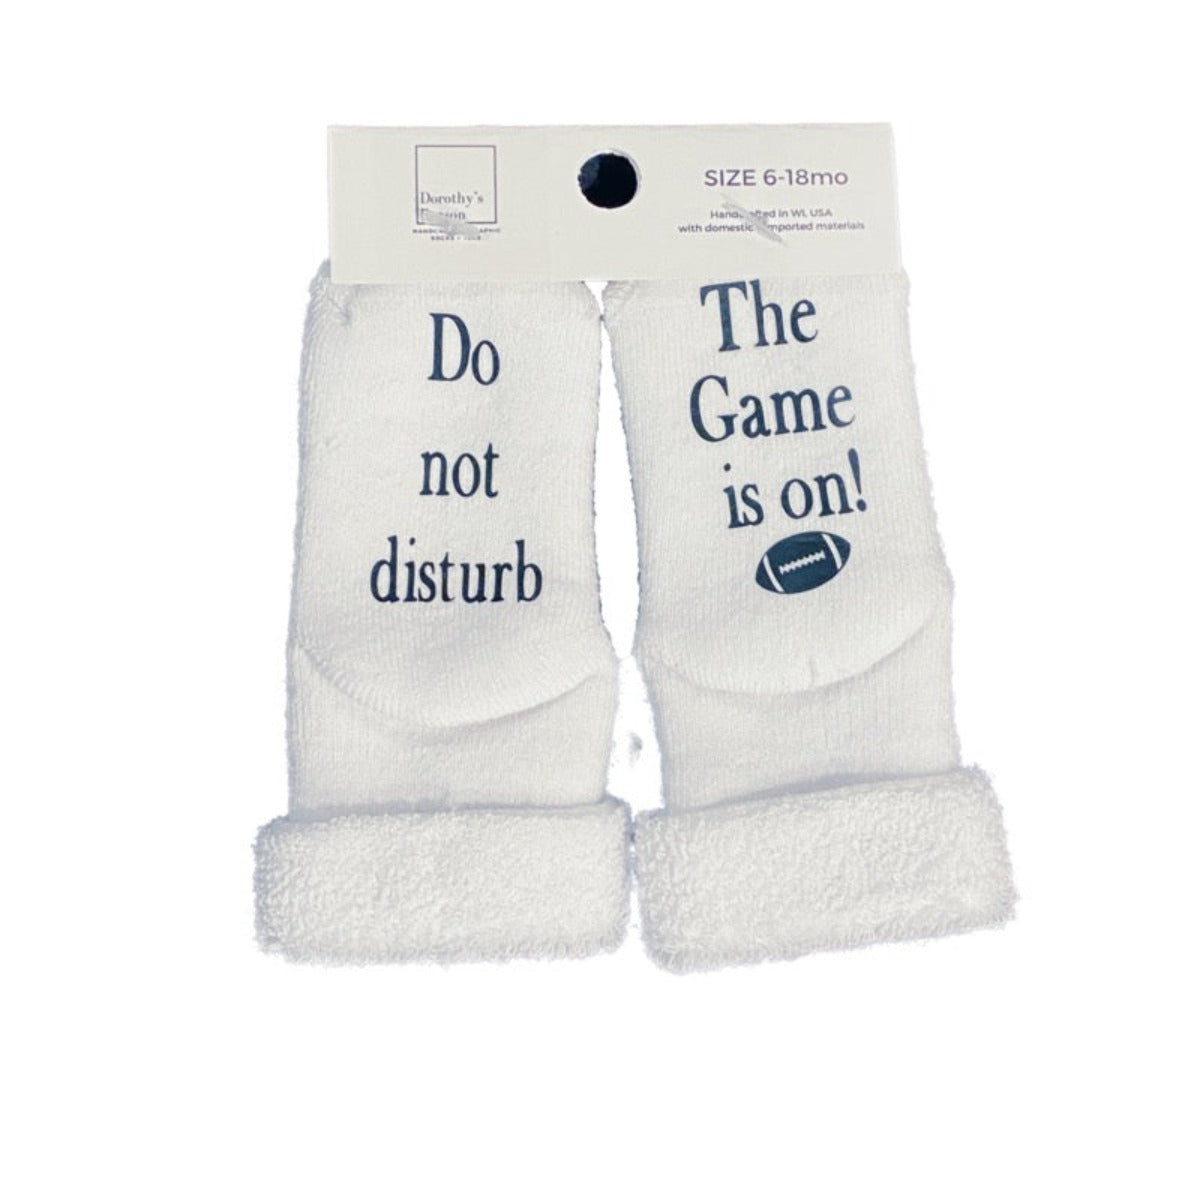 Funny baby socks for new dad. baby socks do not disturb the game is on